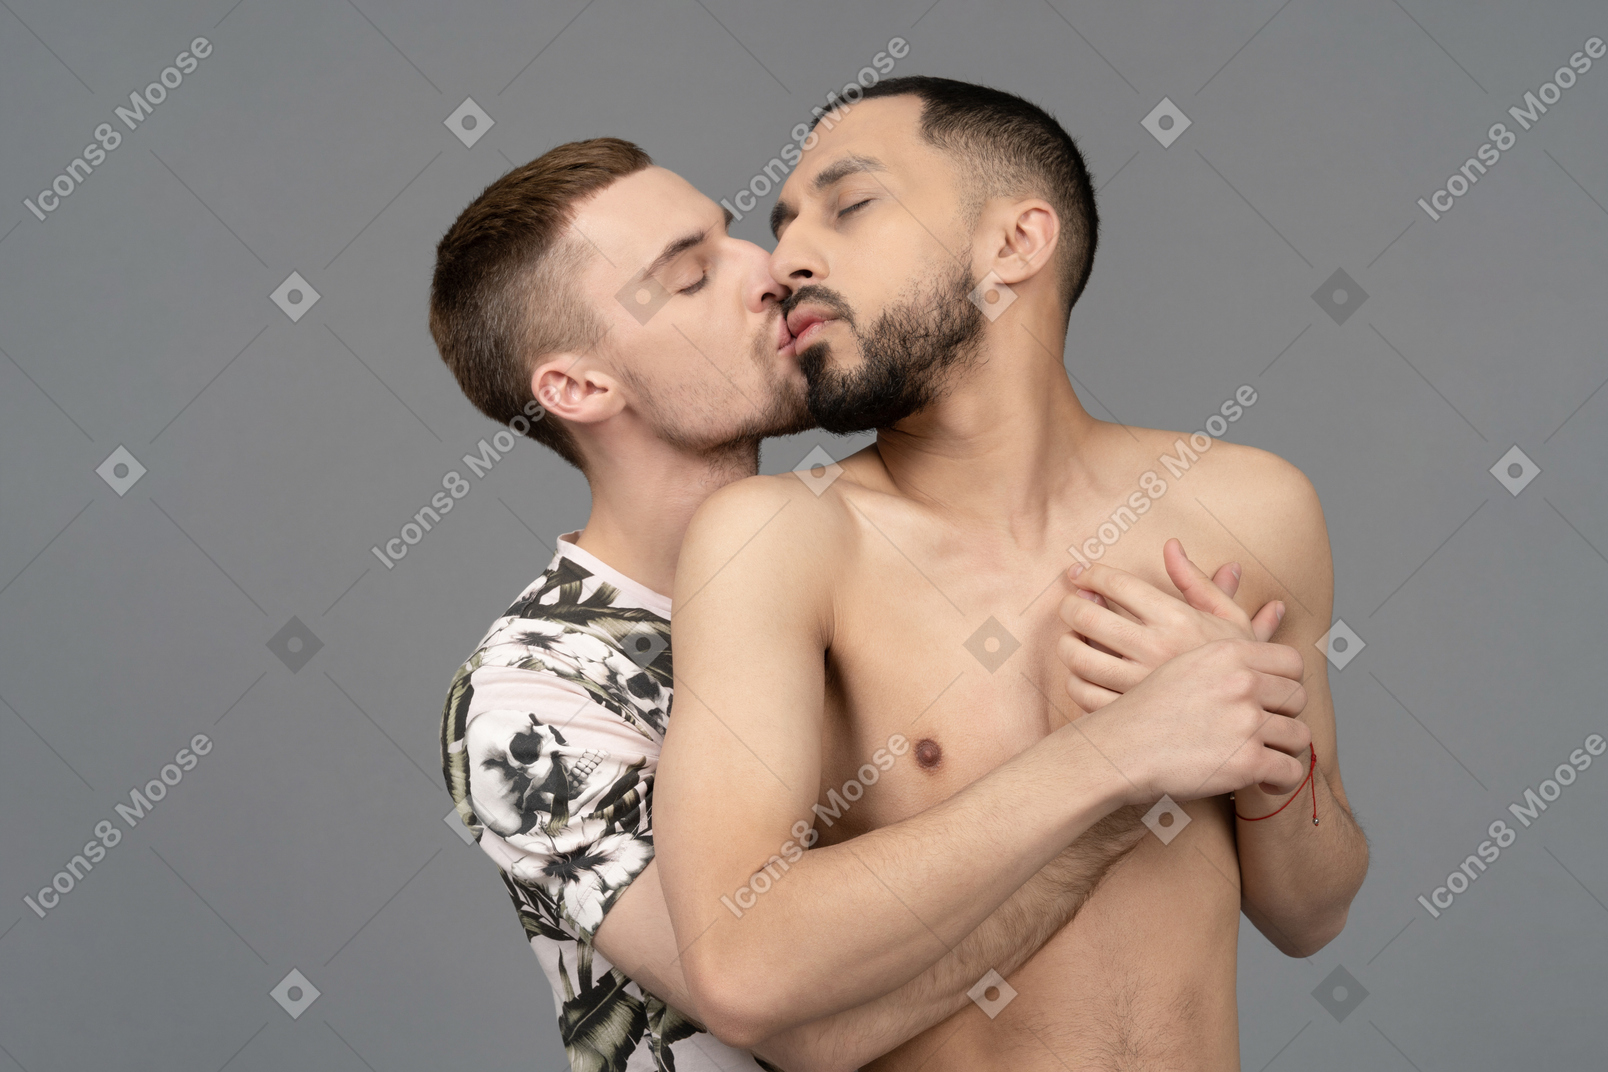 Close-up of a young man back hugging and kissing his shirtless lover